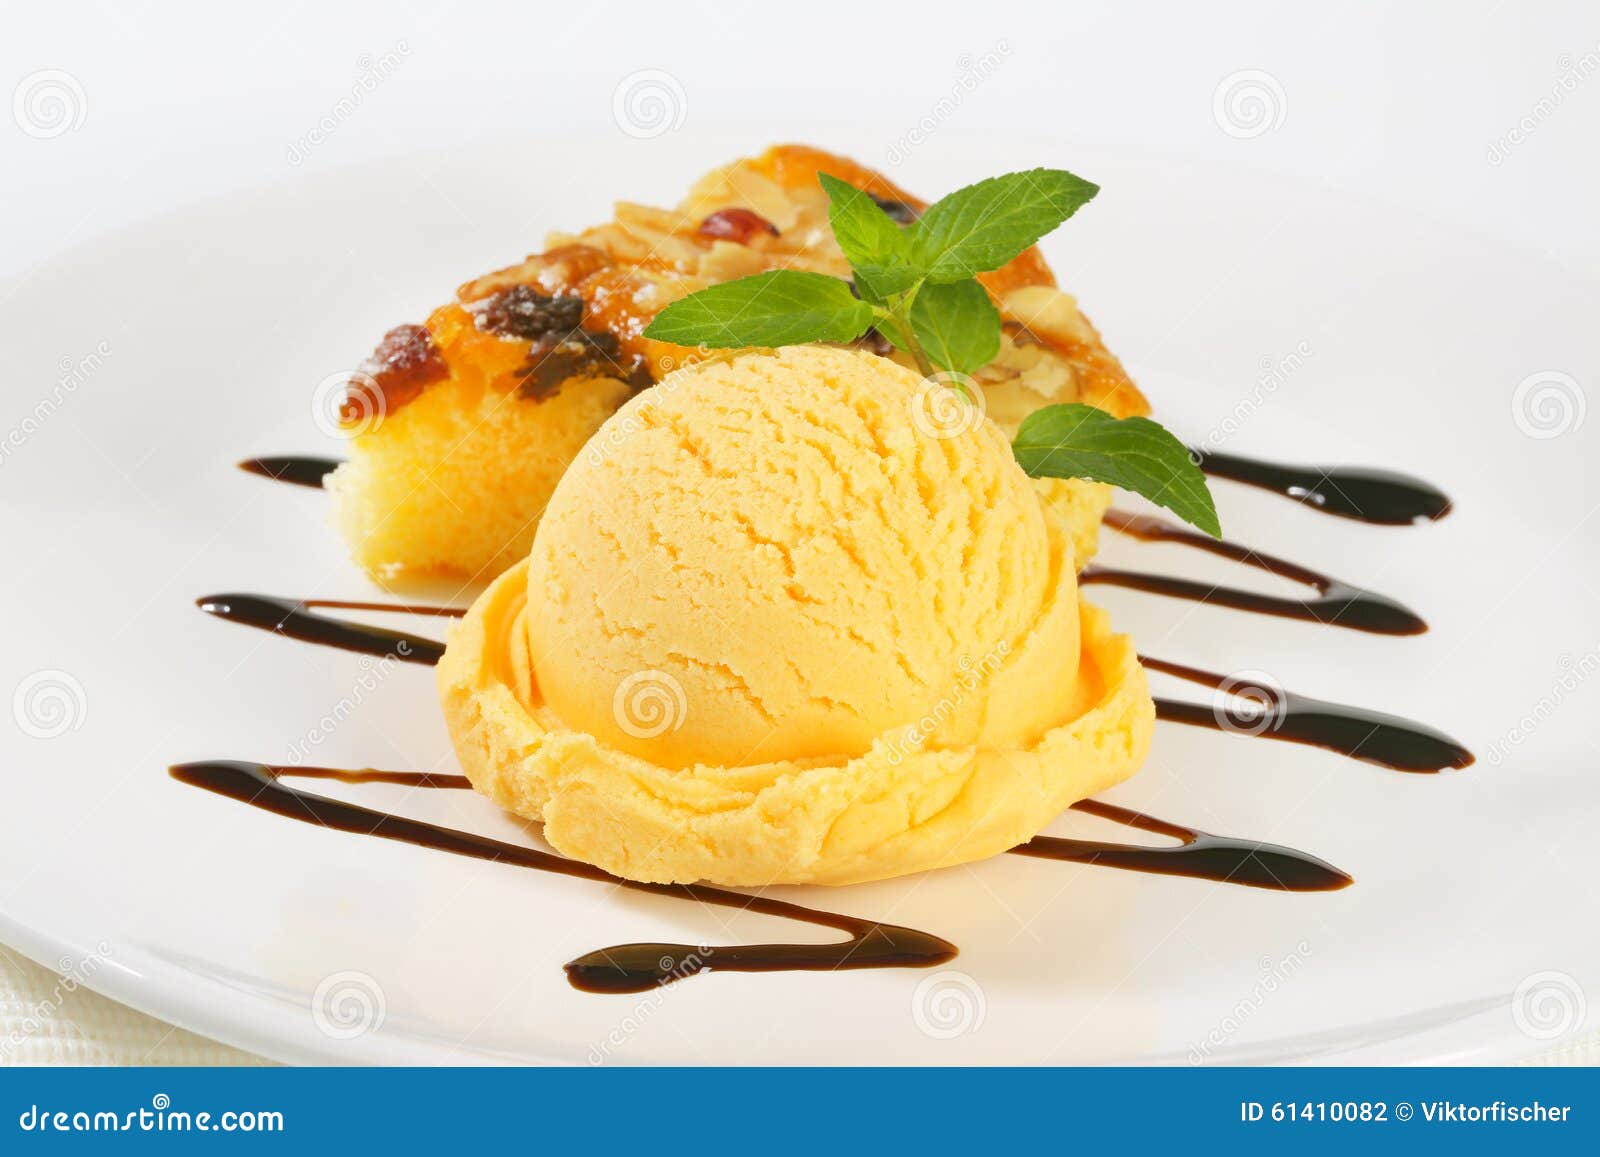 Ice cream and nut cake. Close up of scoop of yellow ice cream and slice of nut cake on white plate